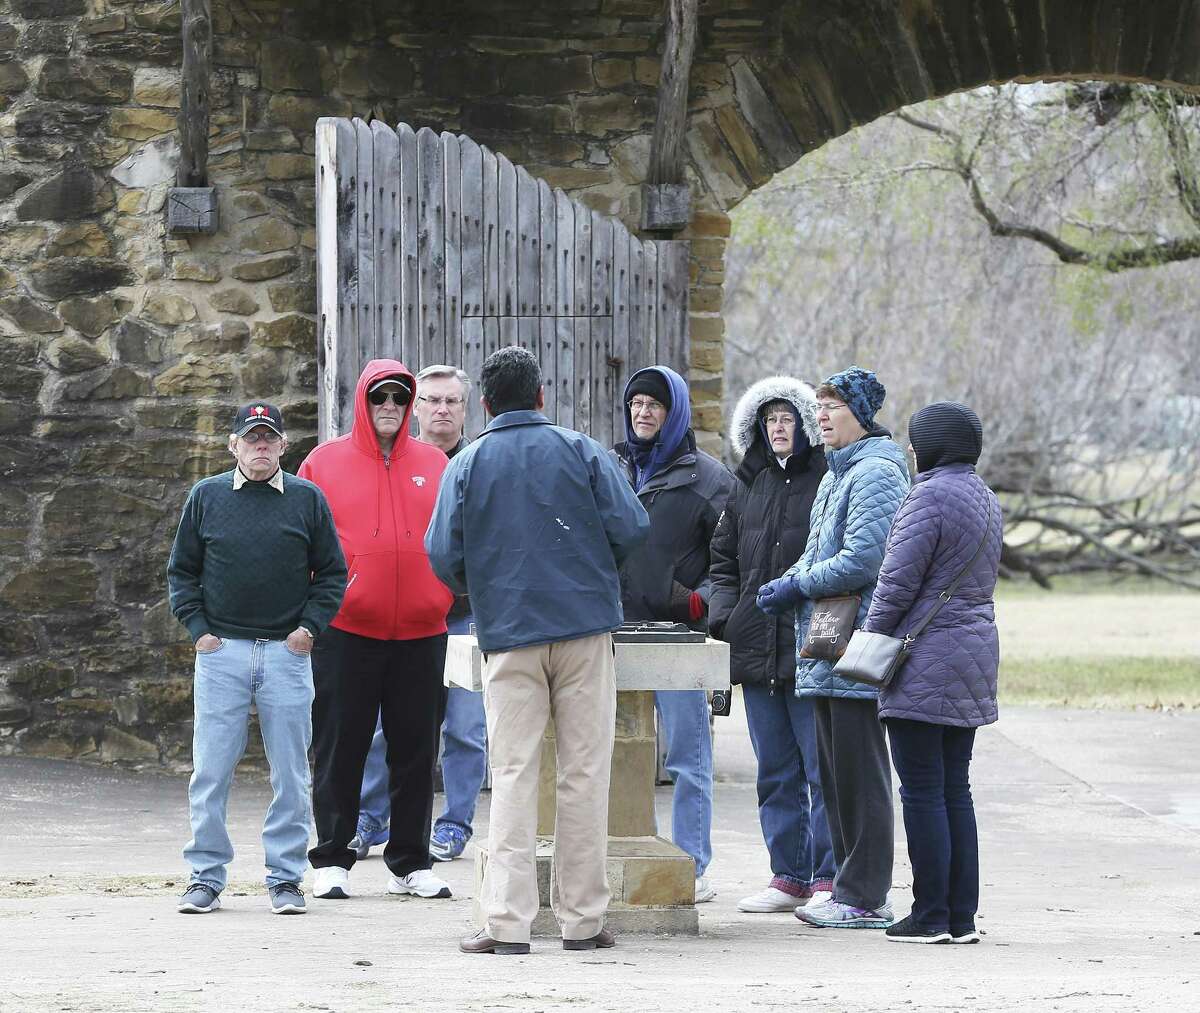 Visitors listen to a tour guide near the entrance of Mission San Jose on January 17, 2018